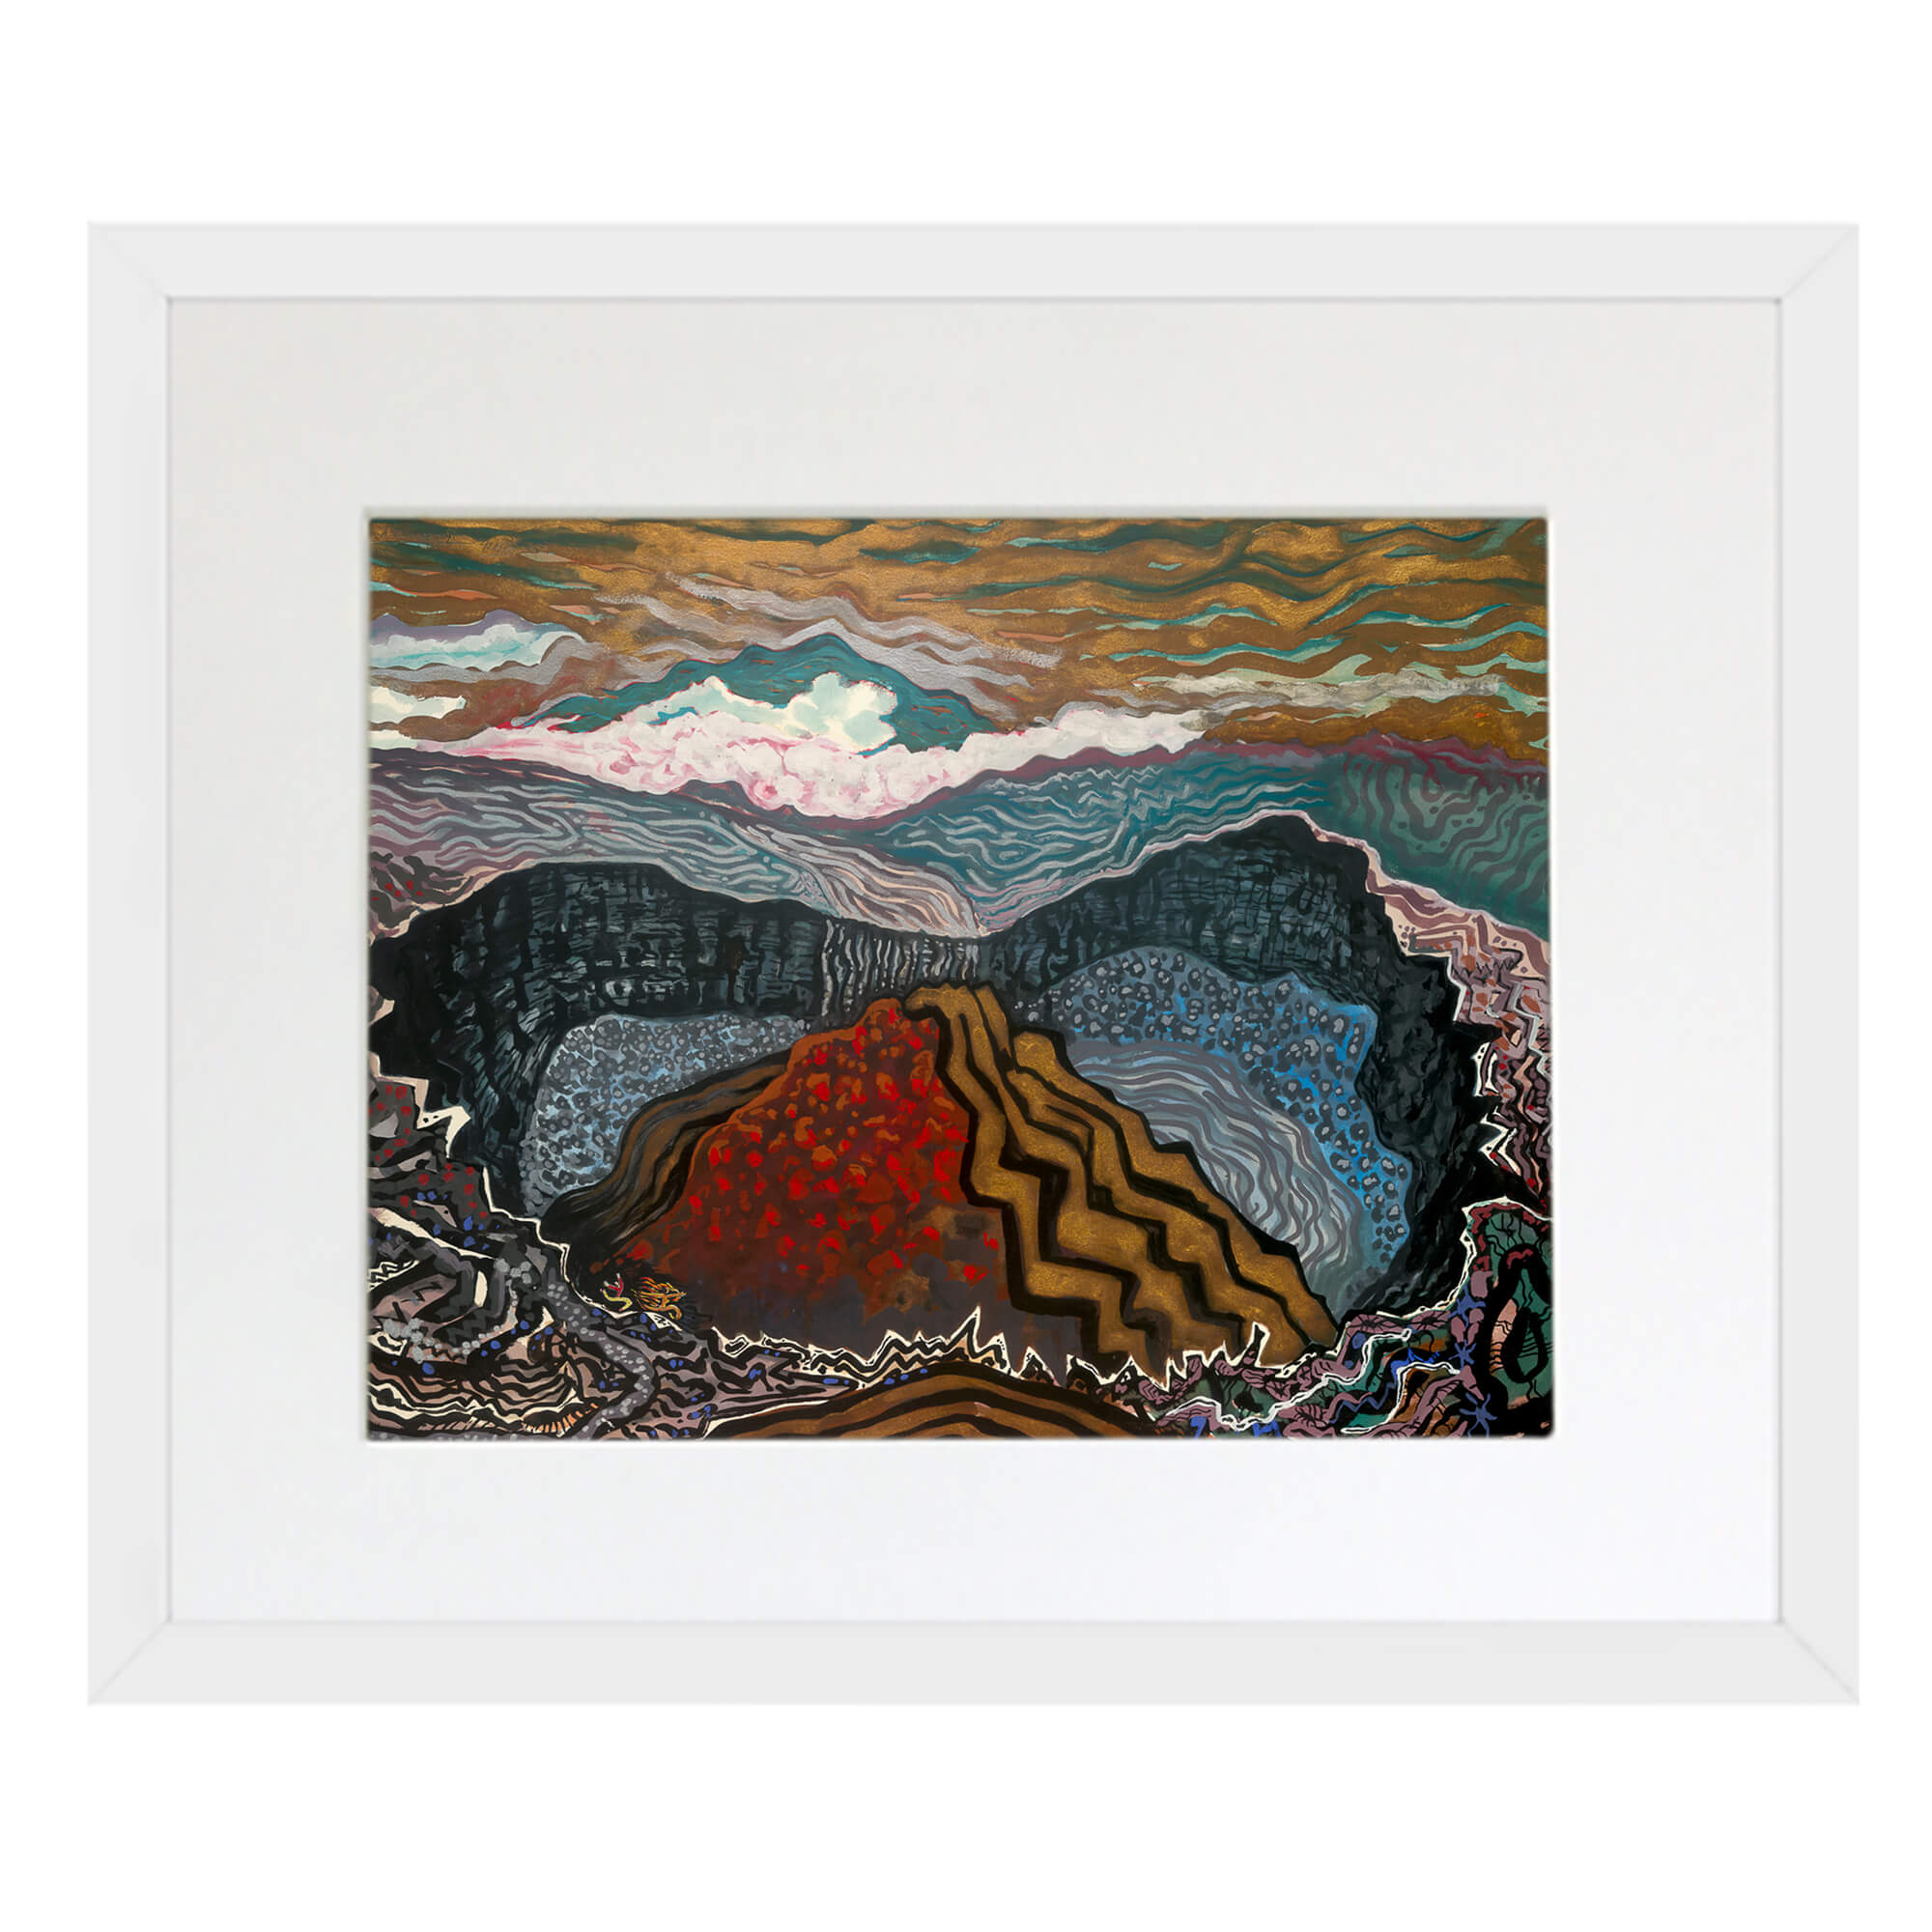 Matted art print with white frame featuring a volcano by hawaii artist robert hazzard